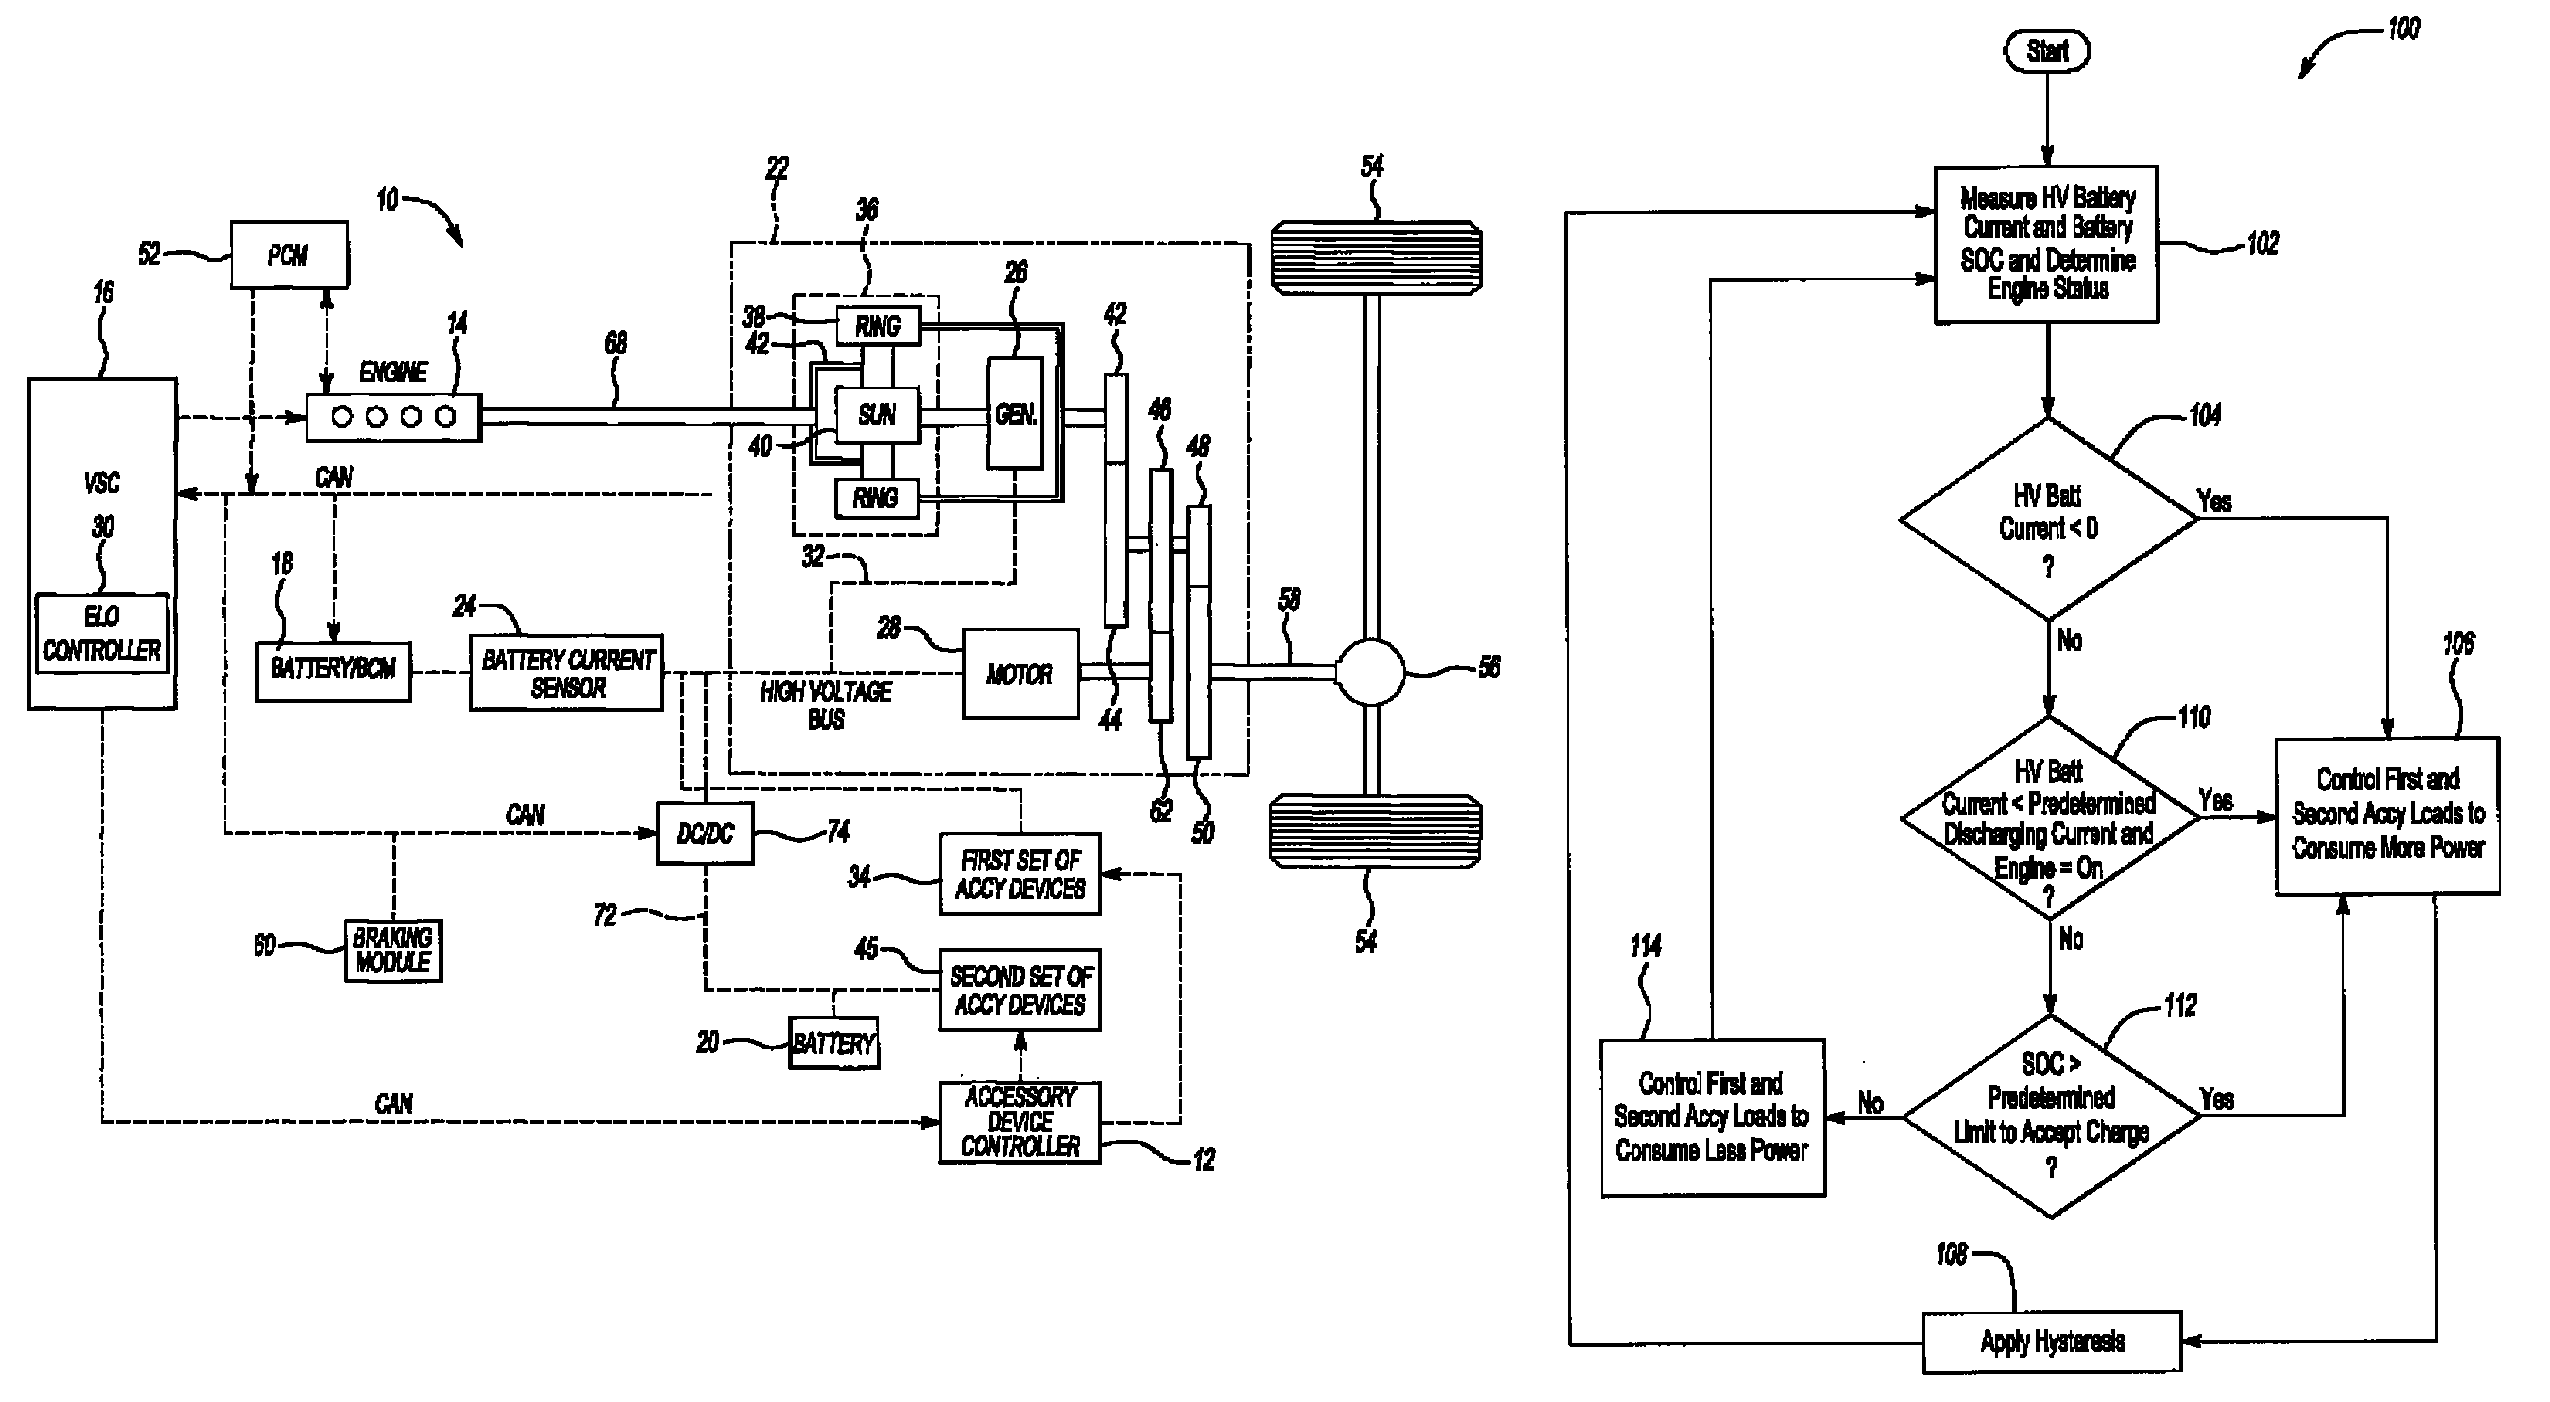 Method and apparatus to control electric power consumption